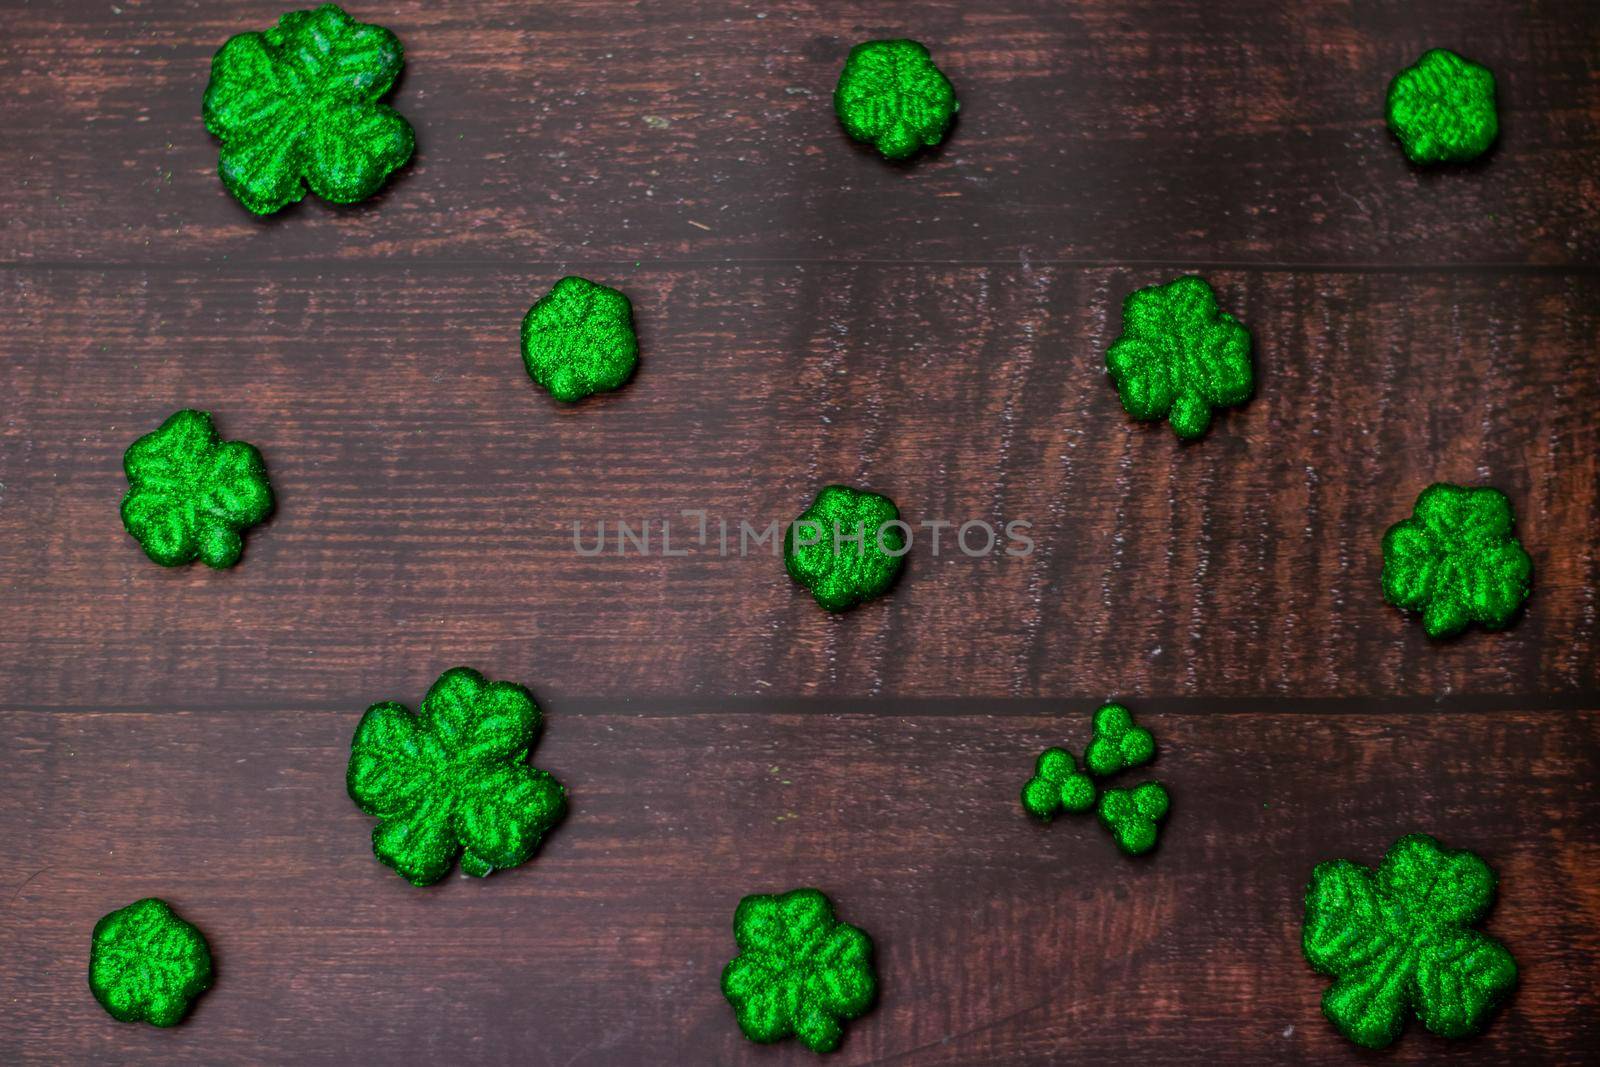 Glitter Covered Four Leaf Clovers in a Pattern on a Wood Background by bju12290